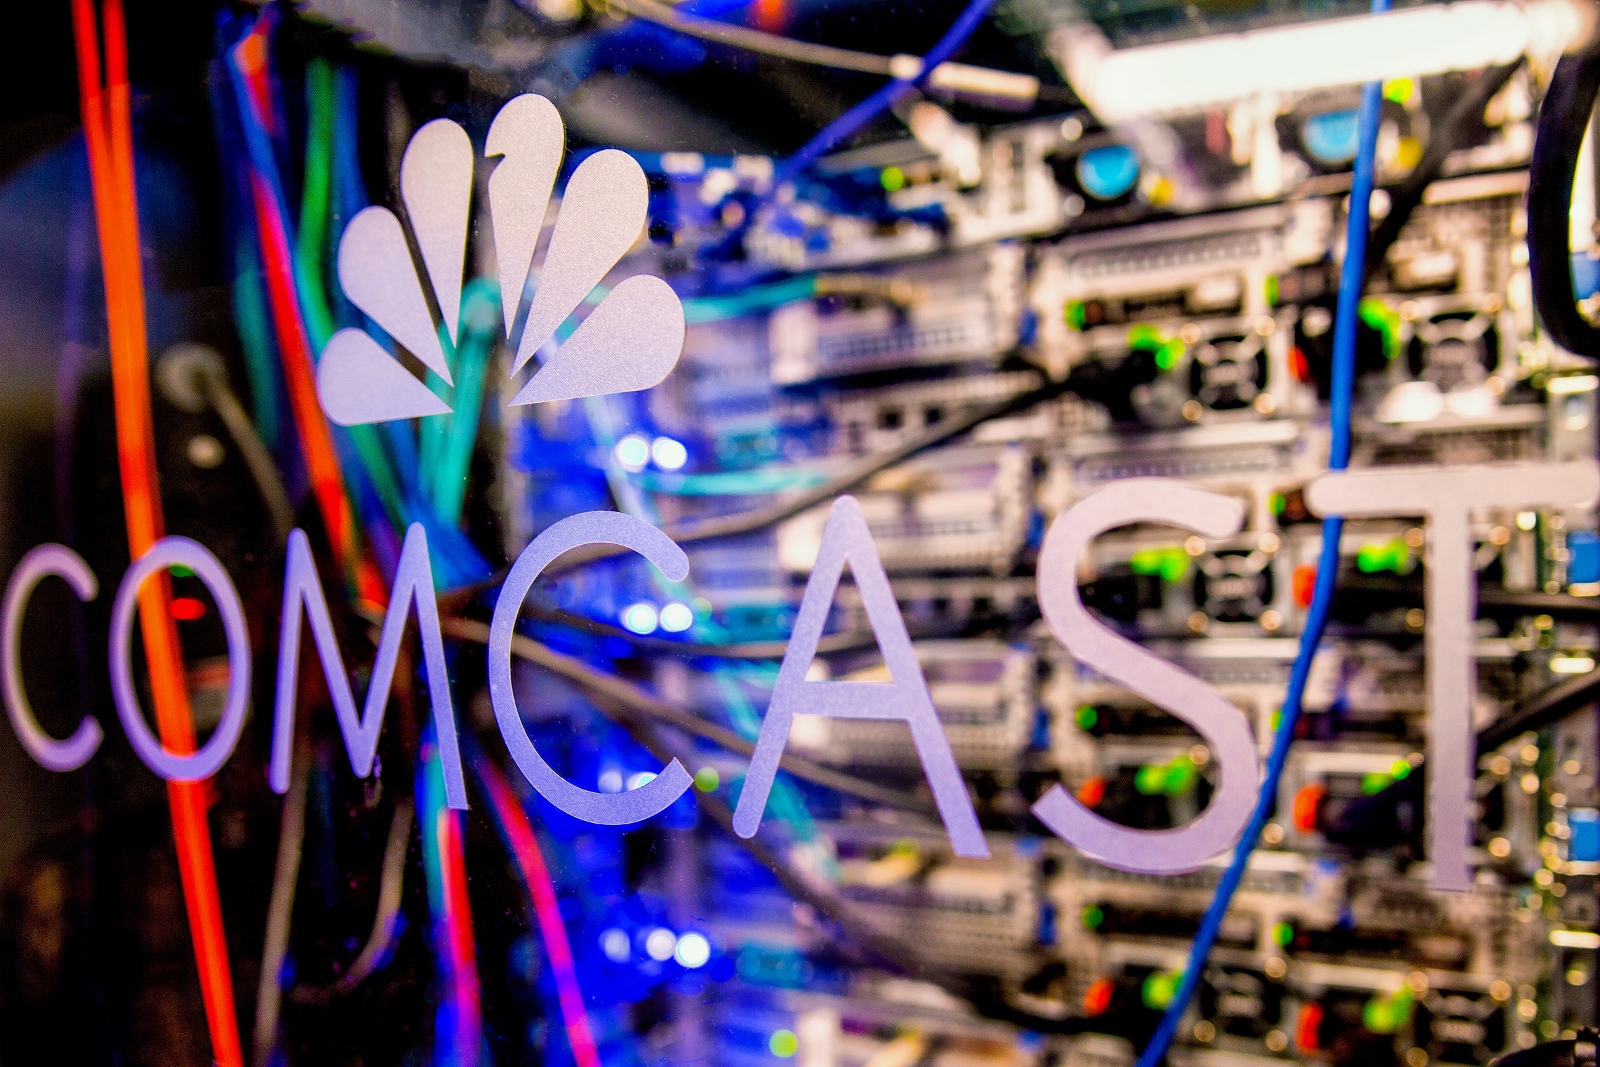 Comcast claims ‘world first’ Full Duplex DOCSIS 4.0 10G connection